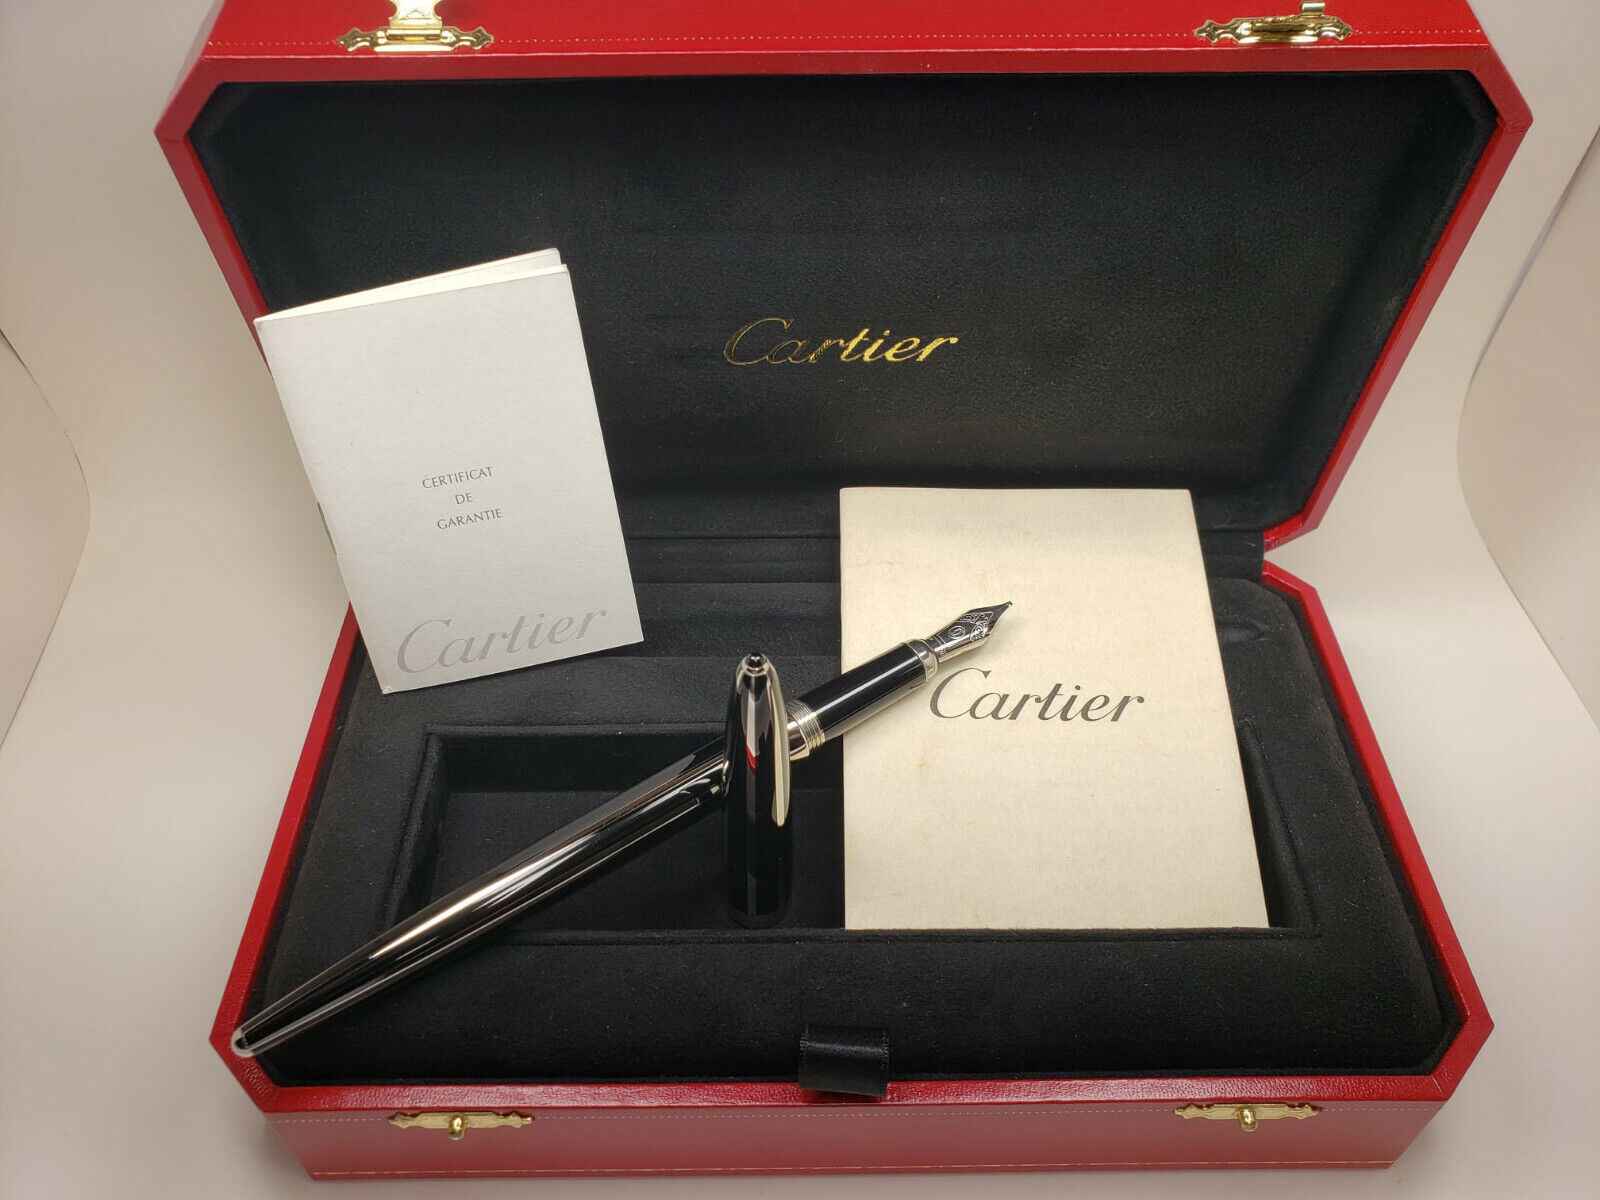 CARTIER CALLIGRAPHY LIMITED EDITION FOUNTAIN PEN 1.3 MM NIB - BOX & PAPERS